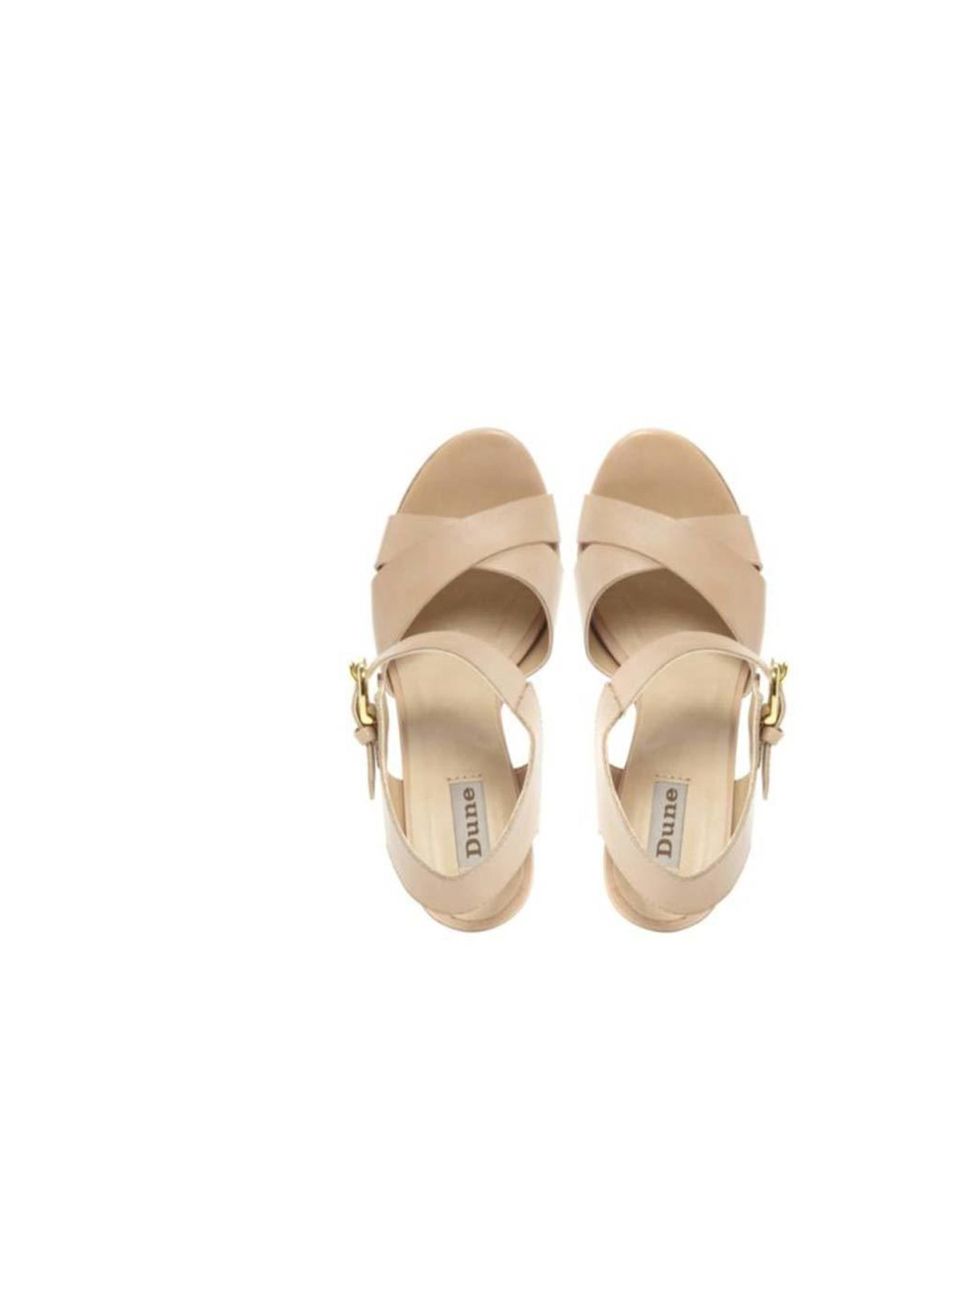 <p>I'll wear these nude leather sandals with printed trousers and a pedicure - perfect for the office and after work drinks, too.</p><p>- Charlie Gowans-Eglinton, Fashion Intern</p><p><a href="http://www.dune.co.uk/flick-two-part-block-heel-leather-sandal